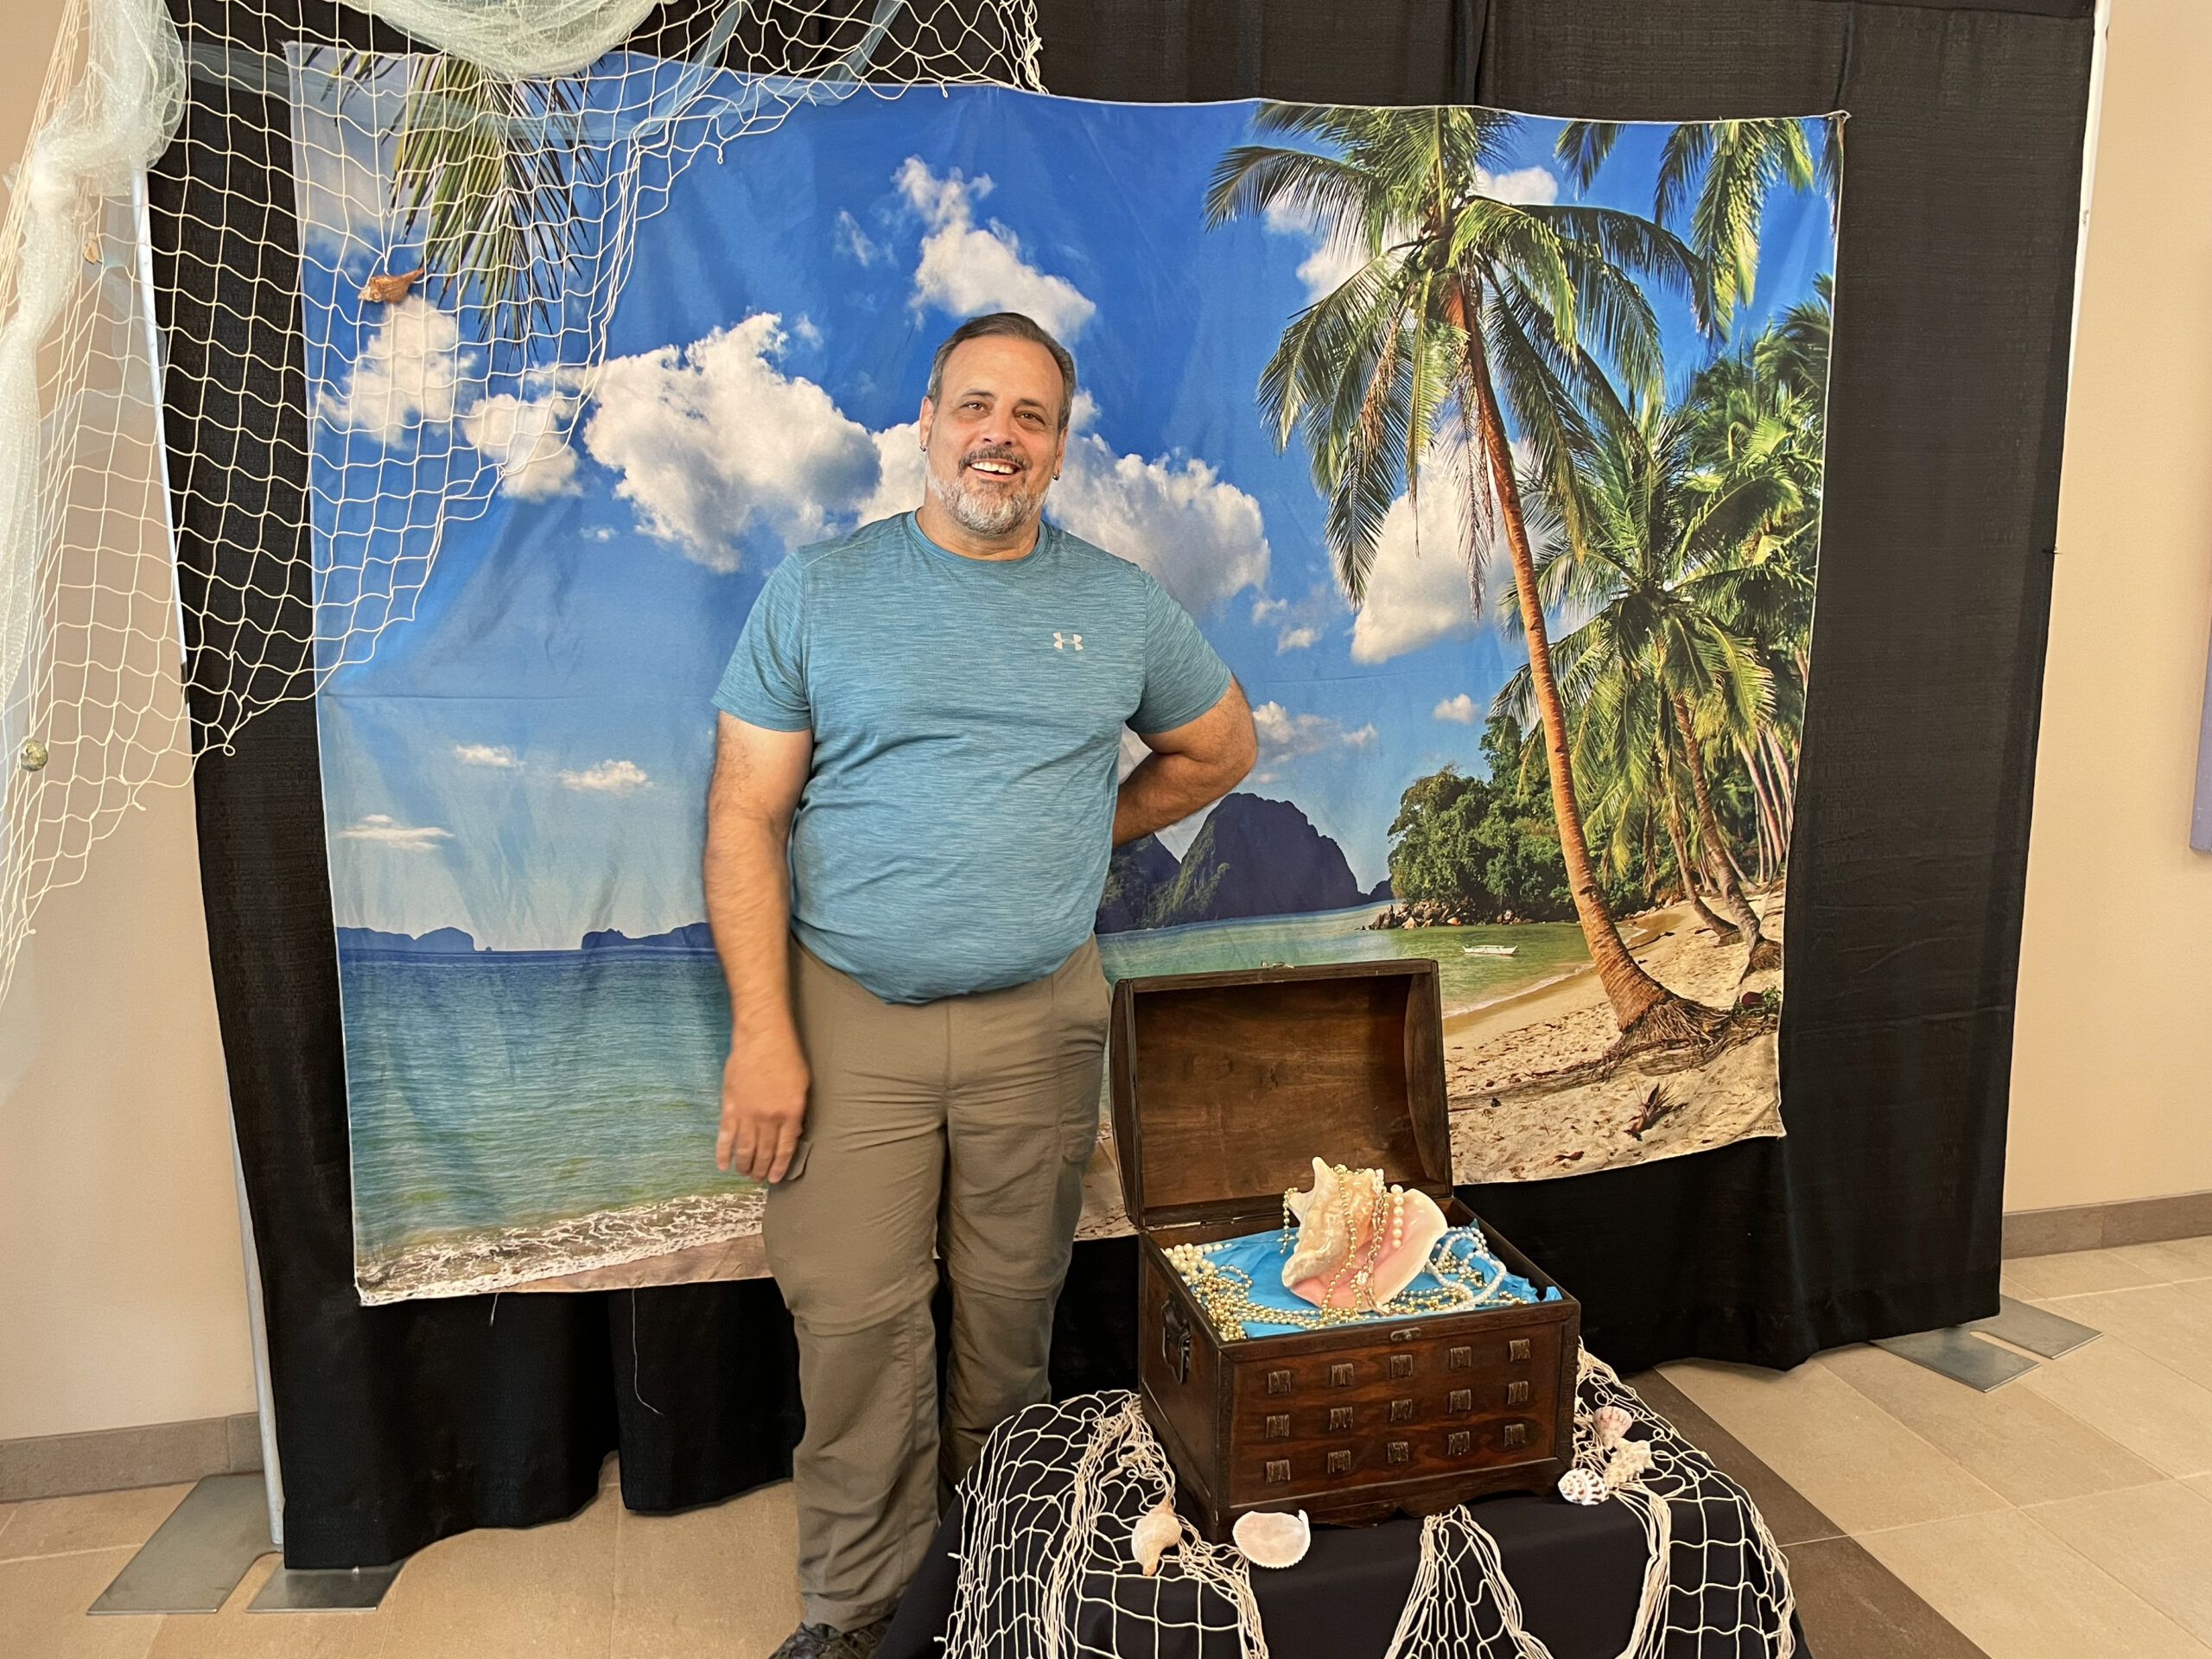 Case manager Frank Rivas stands in front of an ocean view backdrop for CFI's photo booth at the 40th Anniversary Celebration on August 5th at the Colorado Mesa University Ballroom. 